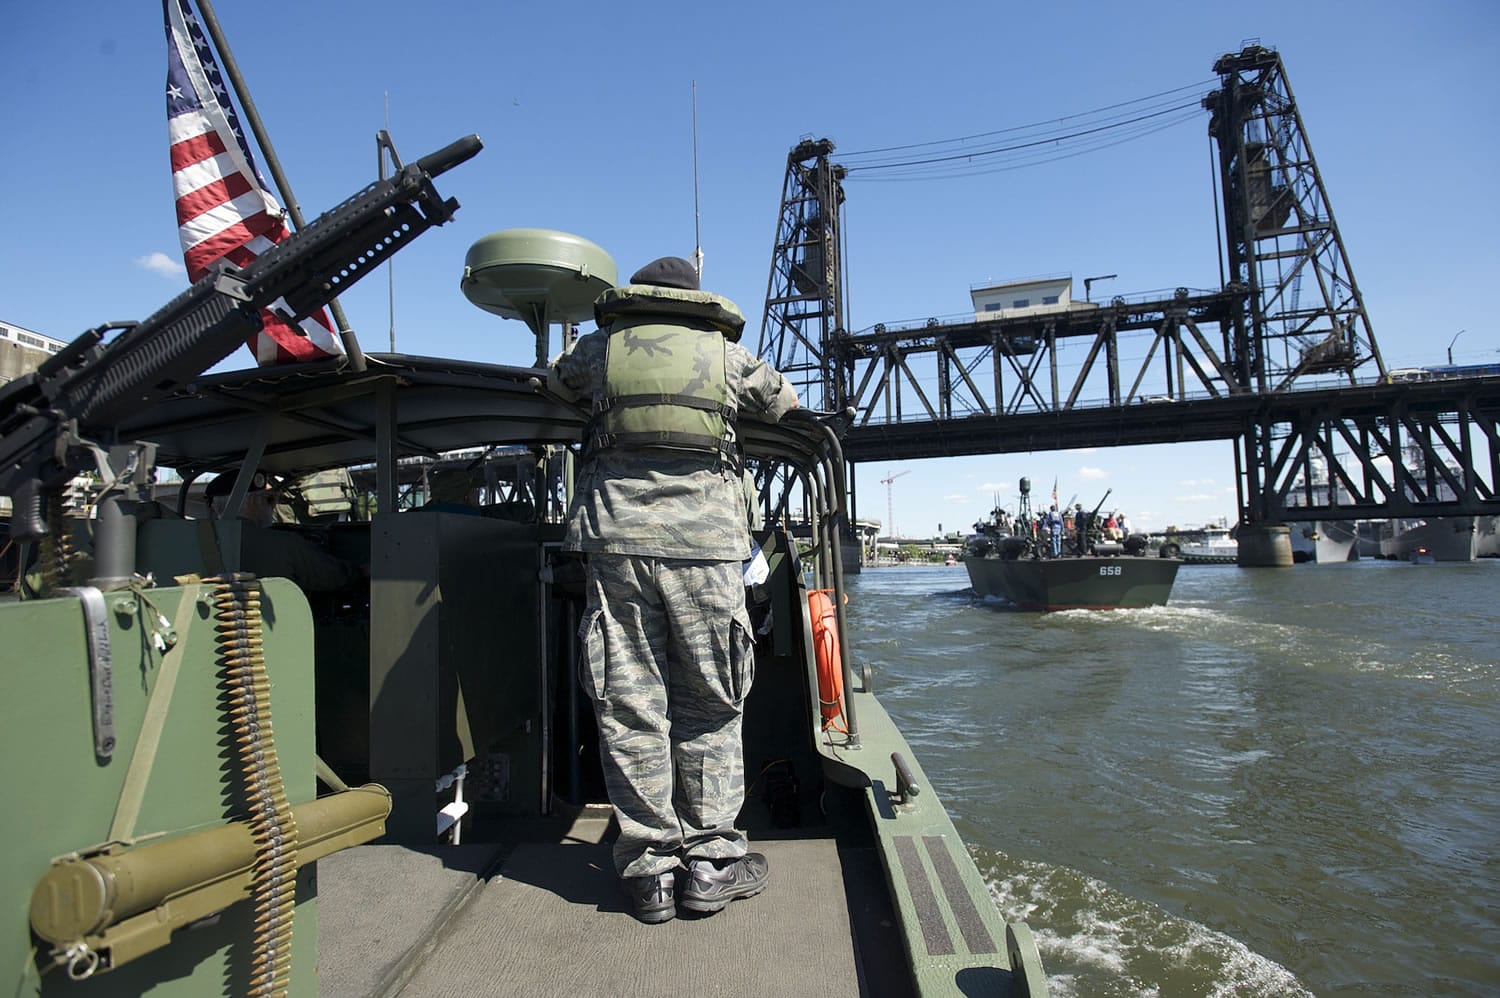 Photos by Steven Lane/The Columbian
A restored river patrol boat operated by the Gamewardens Association and PT-658, going under a bridge on the Willamette River, are the two historic participants in the 2015 Rose Festival fleet.